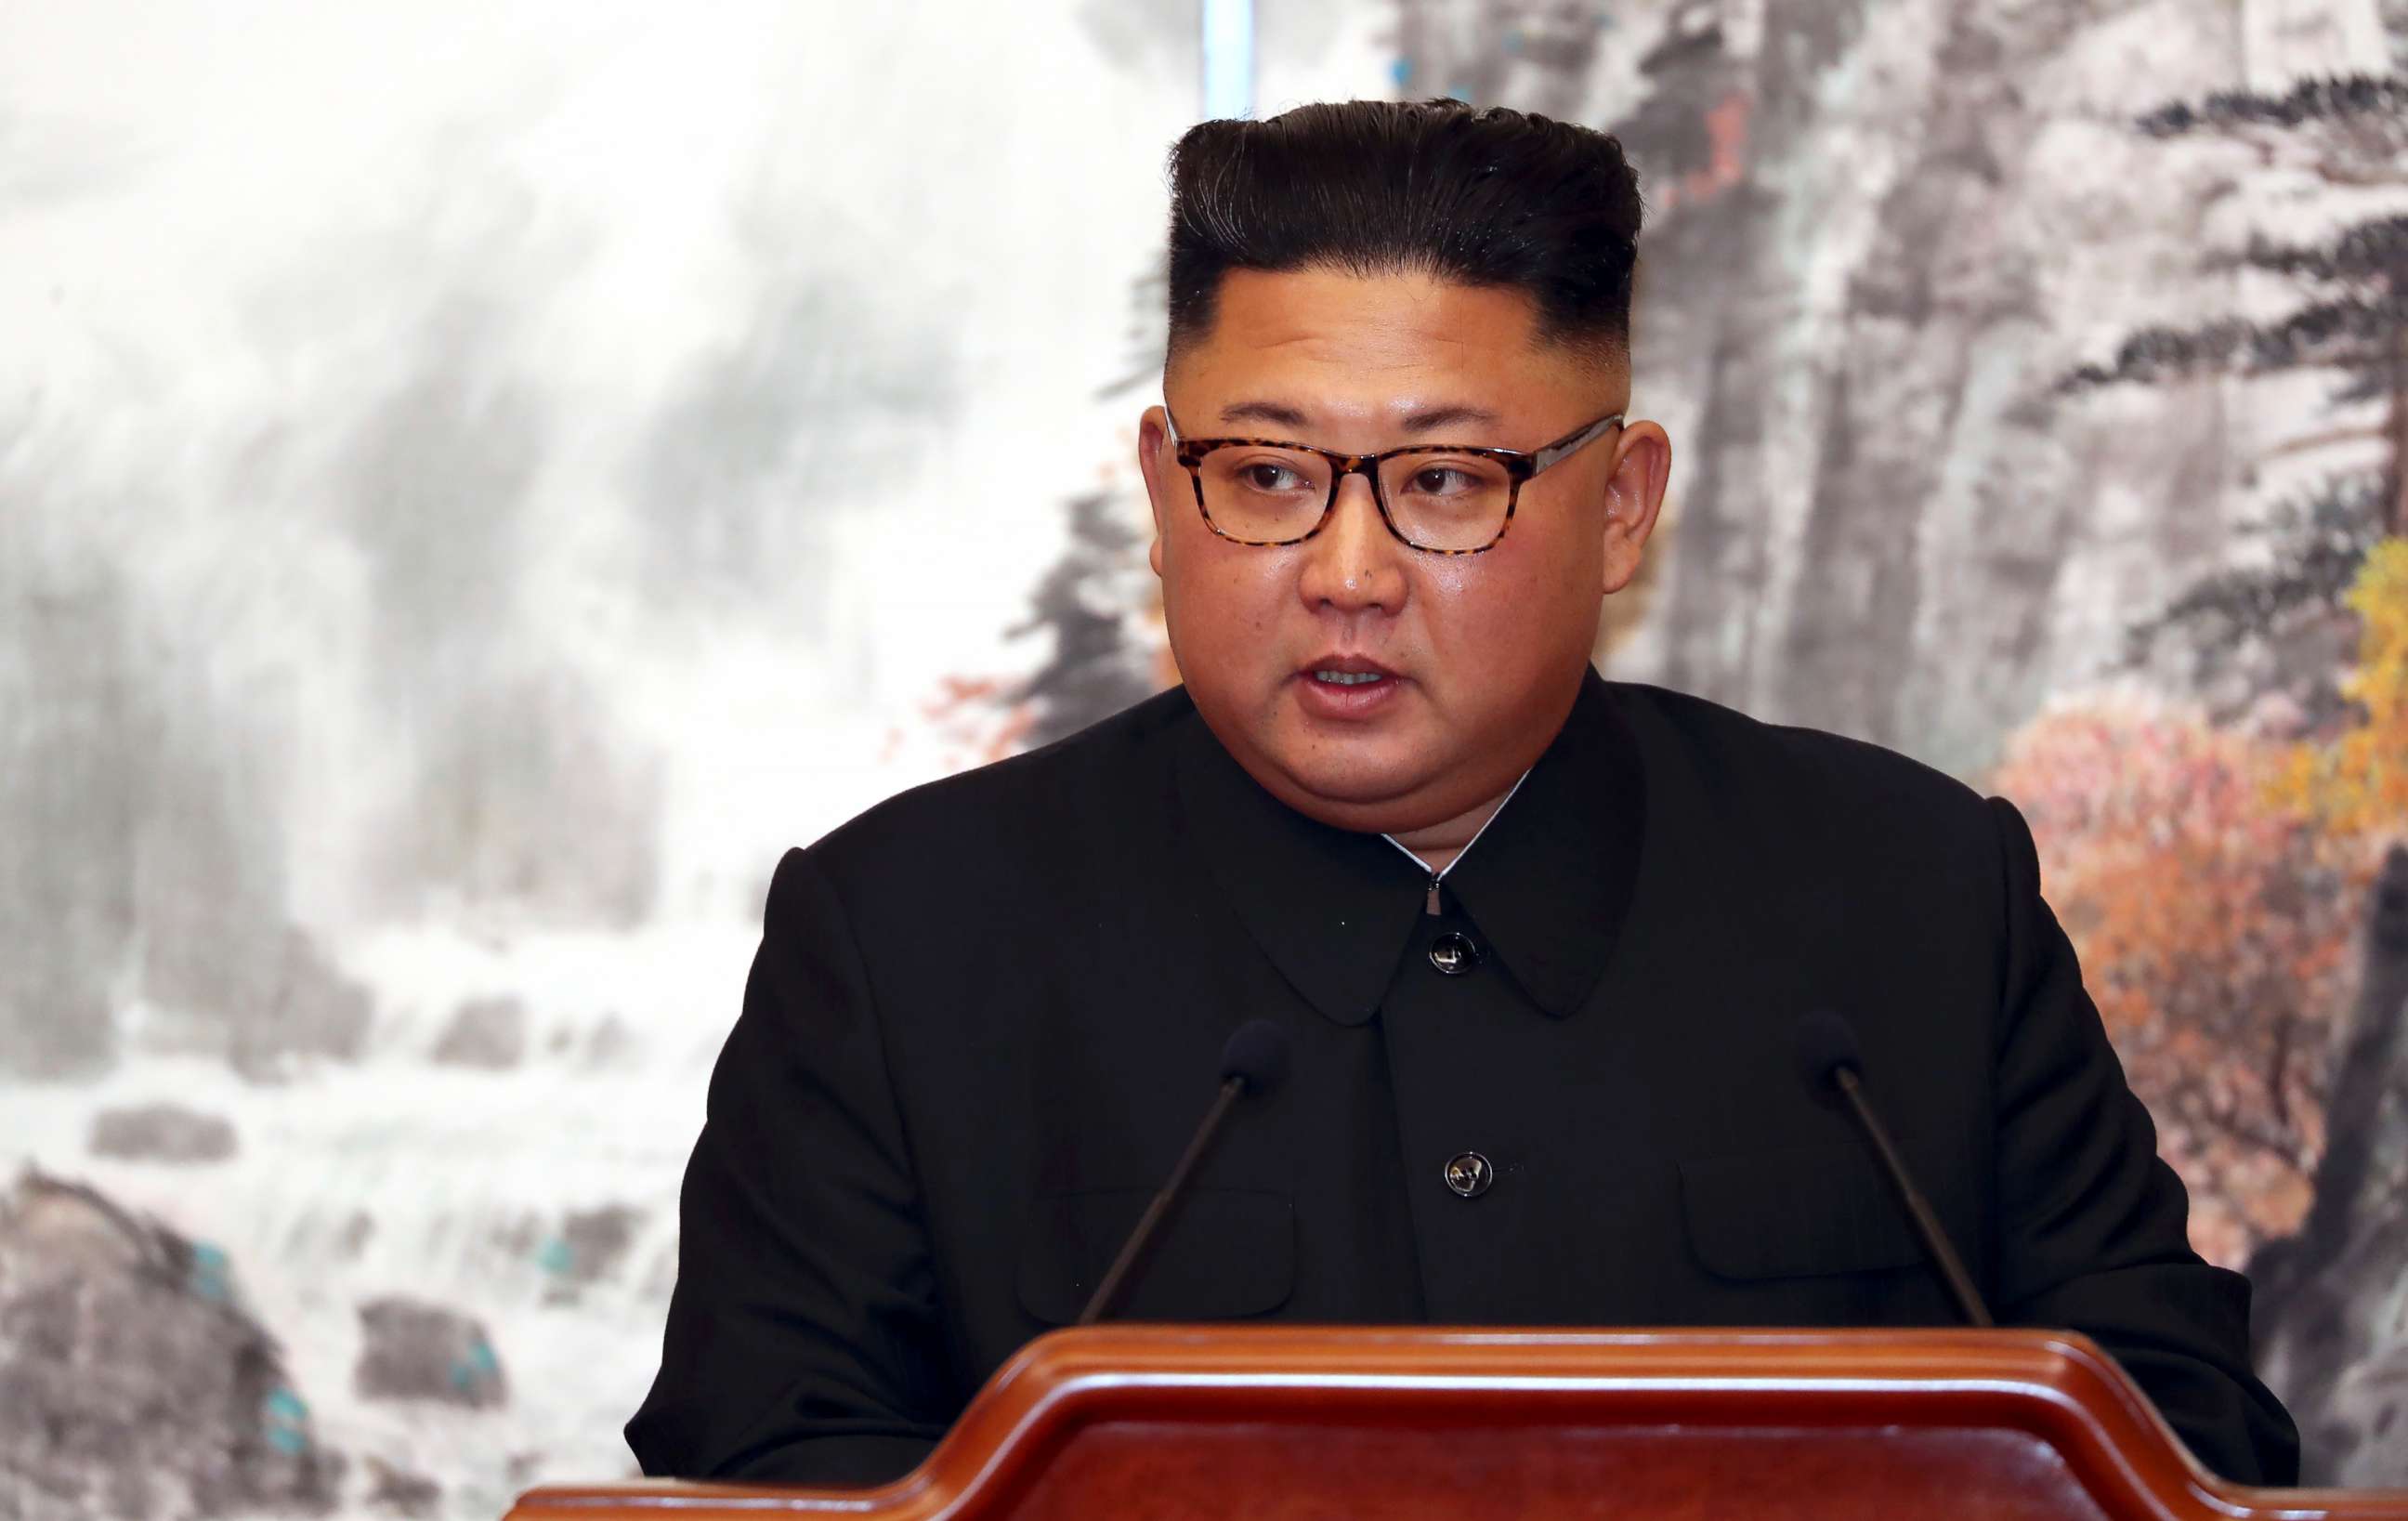 Kim Jong Un reaffirms commitment to denuclearization in letter to